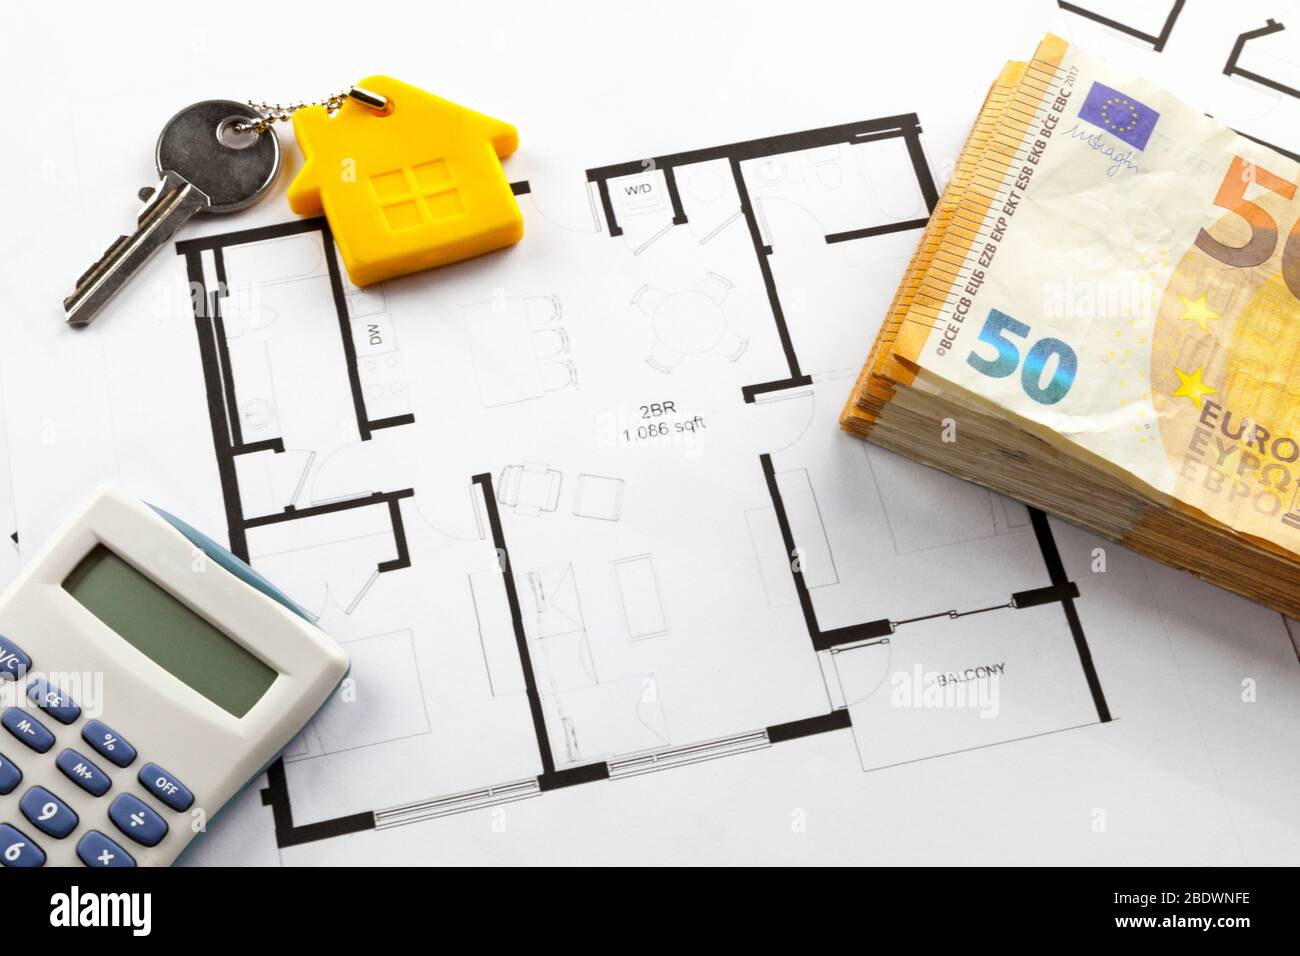 Some Euro banknotes as well as a calculator and a home key on the top of building plans. Stock Photo